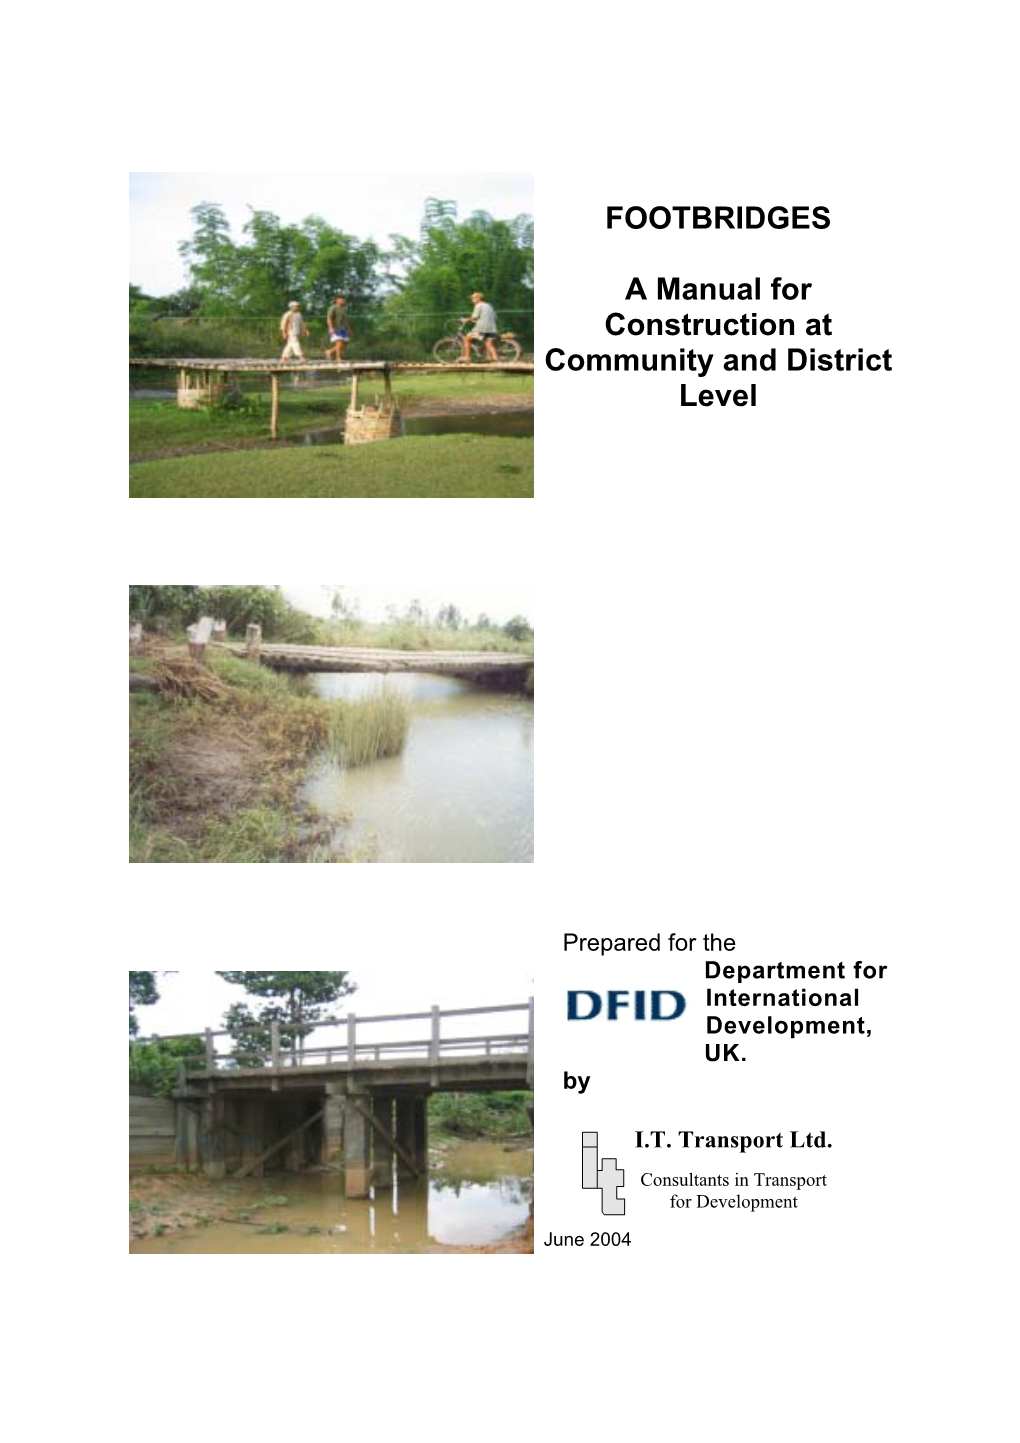 FOOTBRIDGES a Manual for Construction at Community And